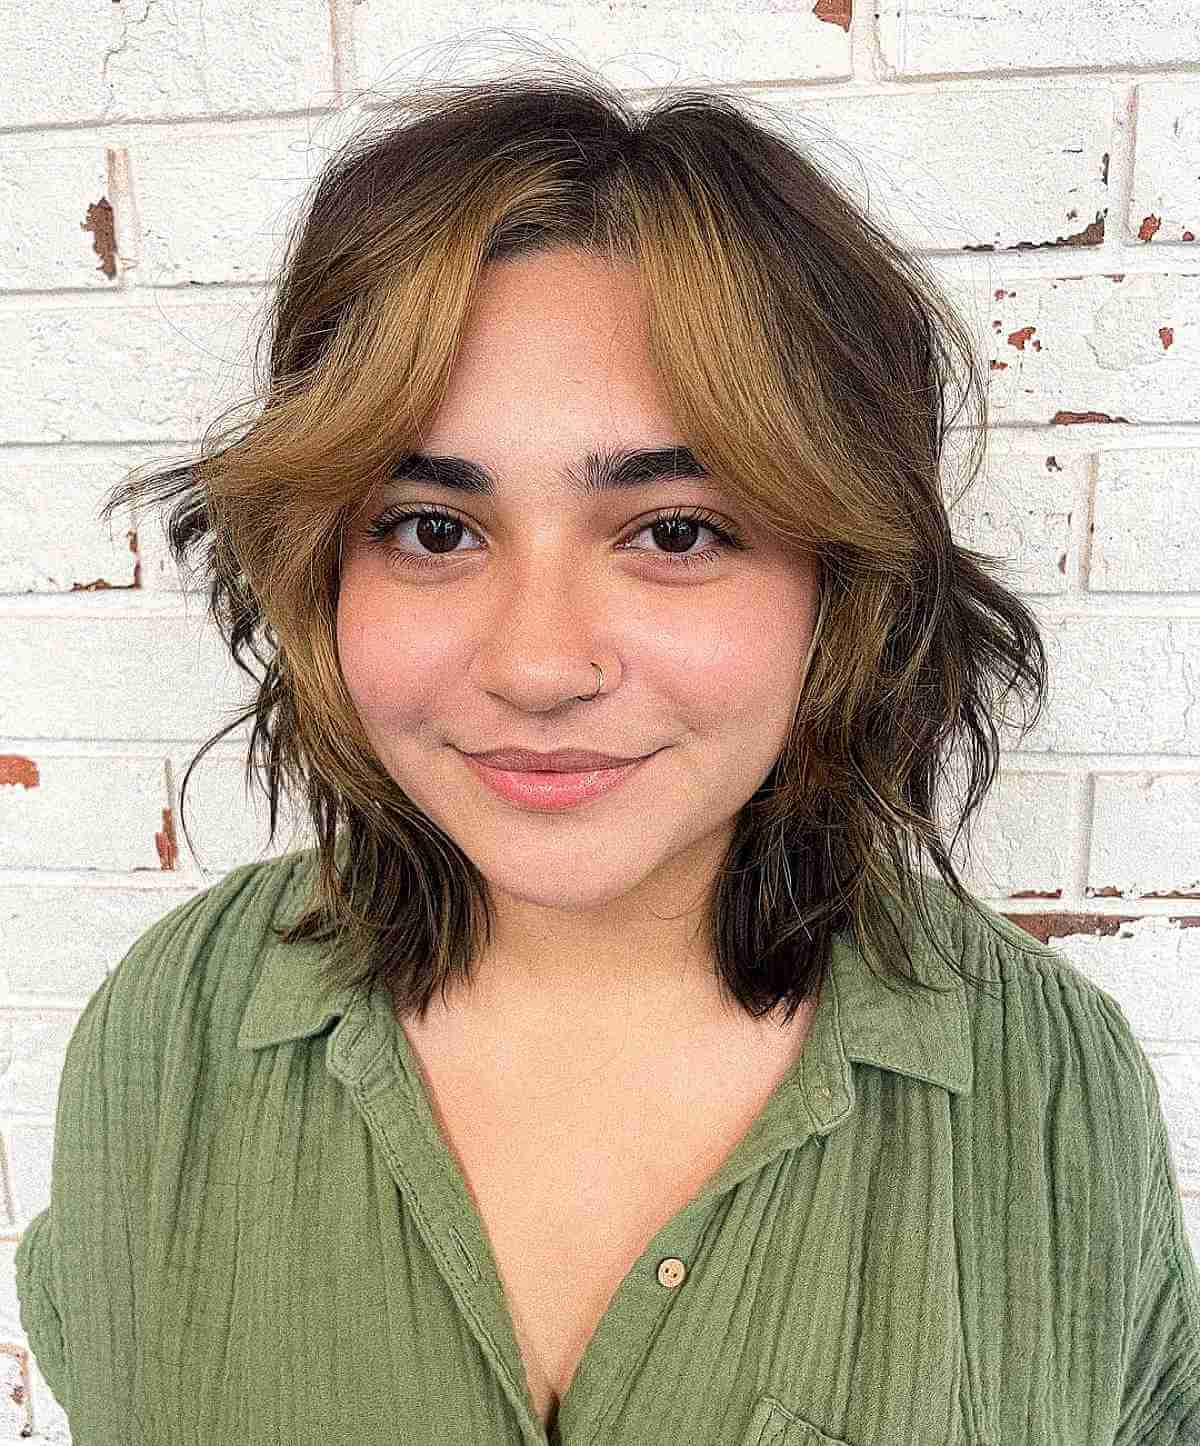 Shagged Wavy Bob With Choppy Layers for Round Face Shapes